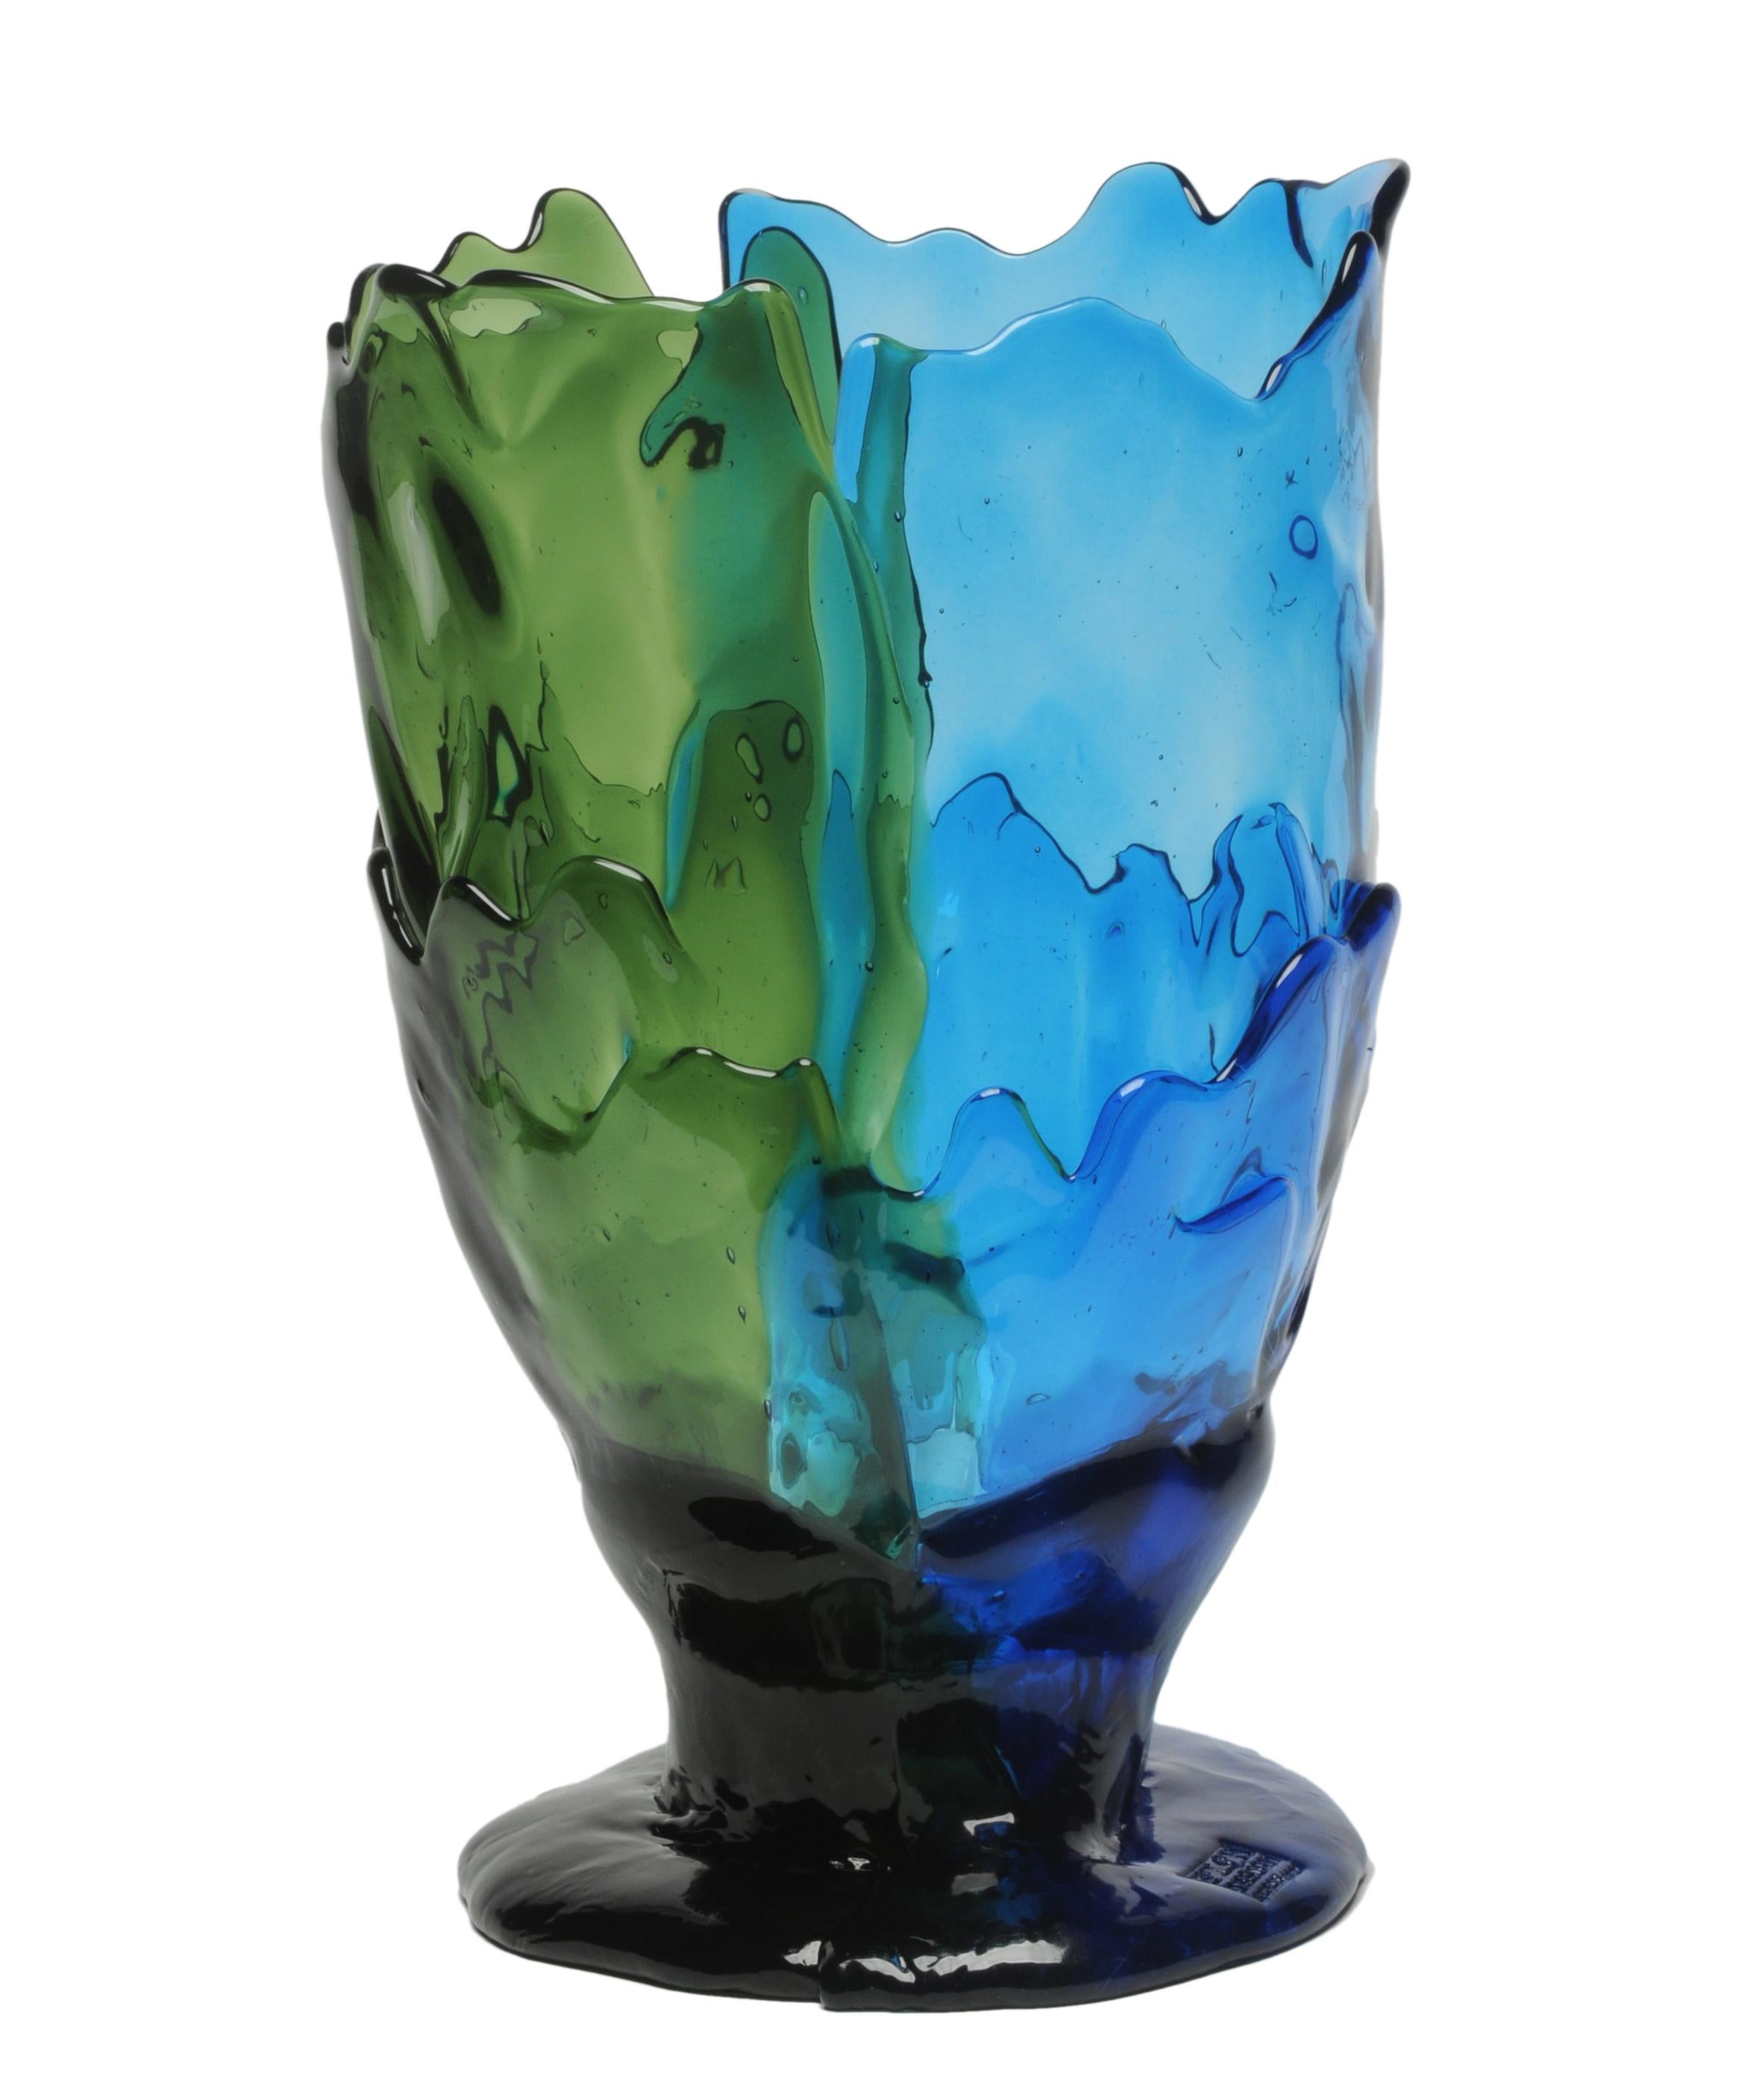 Twin-C vase, clear green and blue.

Vase in soft resin designed by Gaetano Pesce in 1995 for Fish Design collection.

Measures: XL - Ø 30cm x H 56cm

Other sizes available.

Colours: clear green and blue.

Vase in soft resin designed by